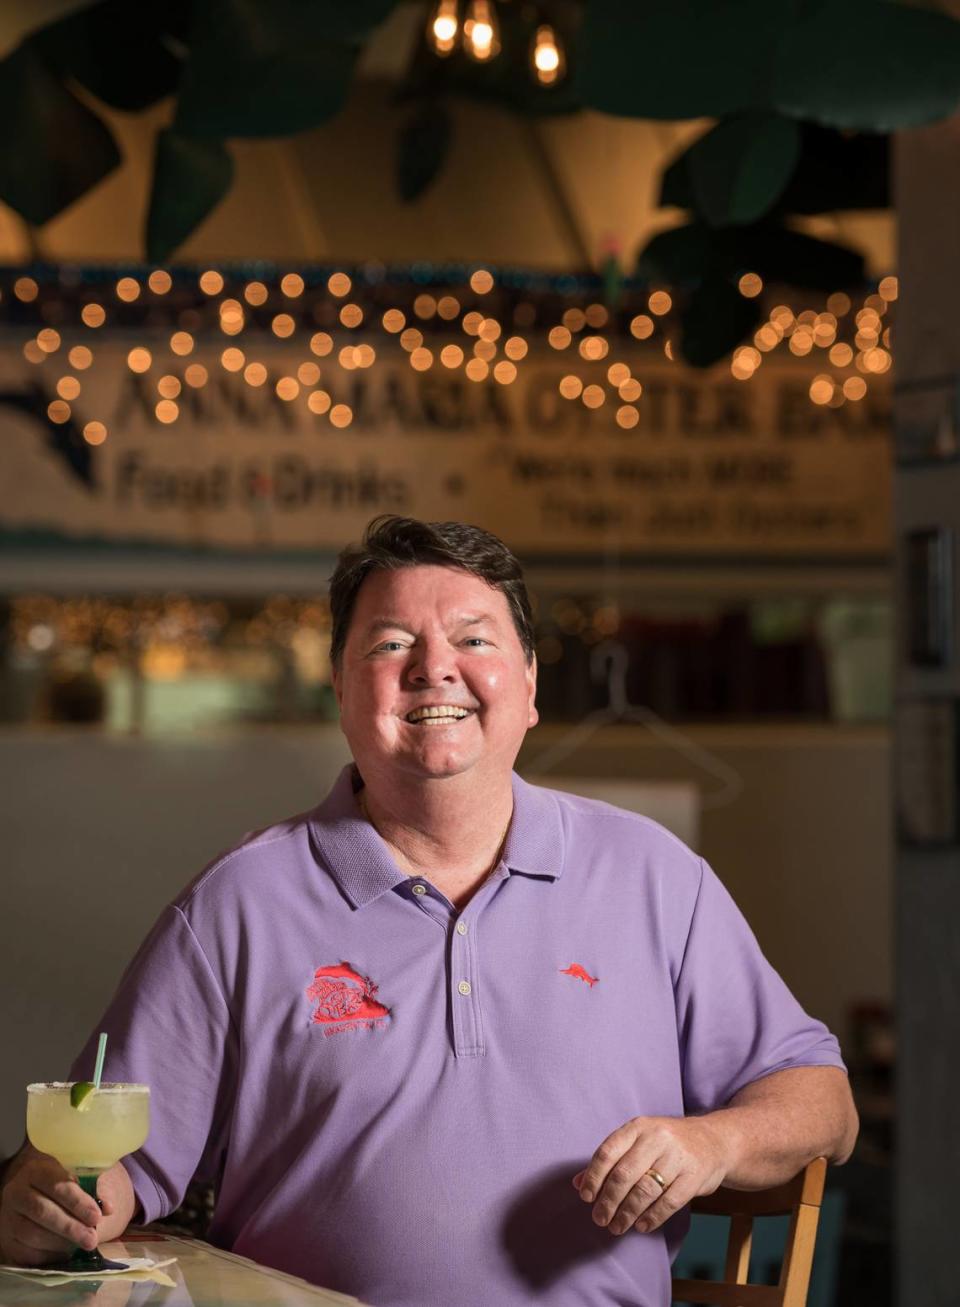 John Horne, CEO of Anna Maria Oyster Bar and chair of the board of the Florida Restaurant & Lodging Association. Courtesy of Anna Maria Oyster Bar